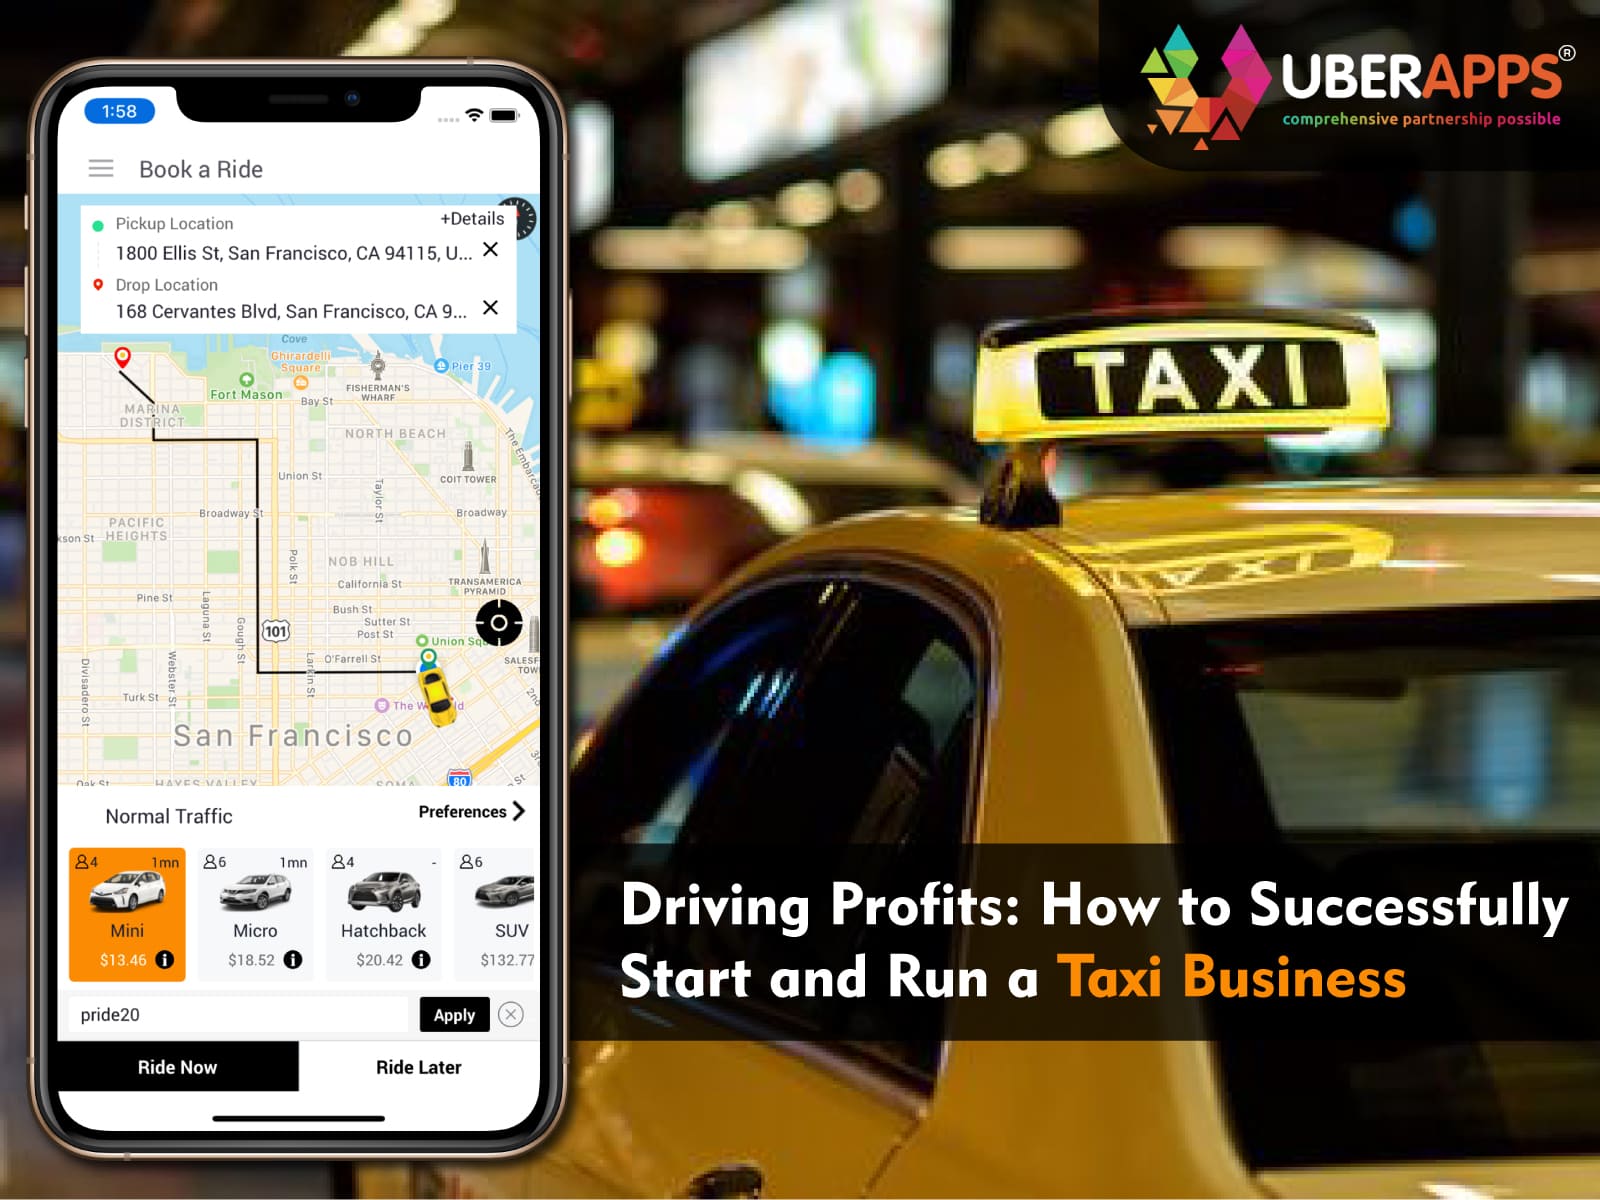 Driving Profits: How to Successfully Start and Run a Taxi Business